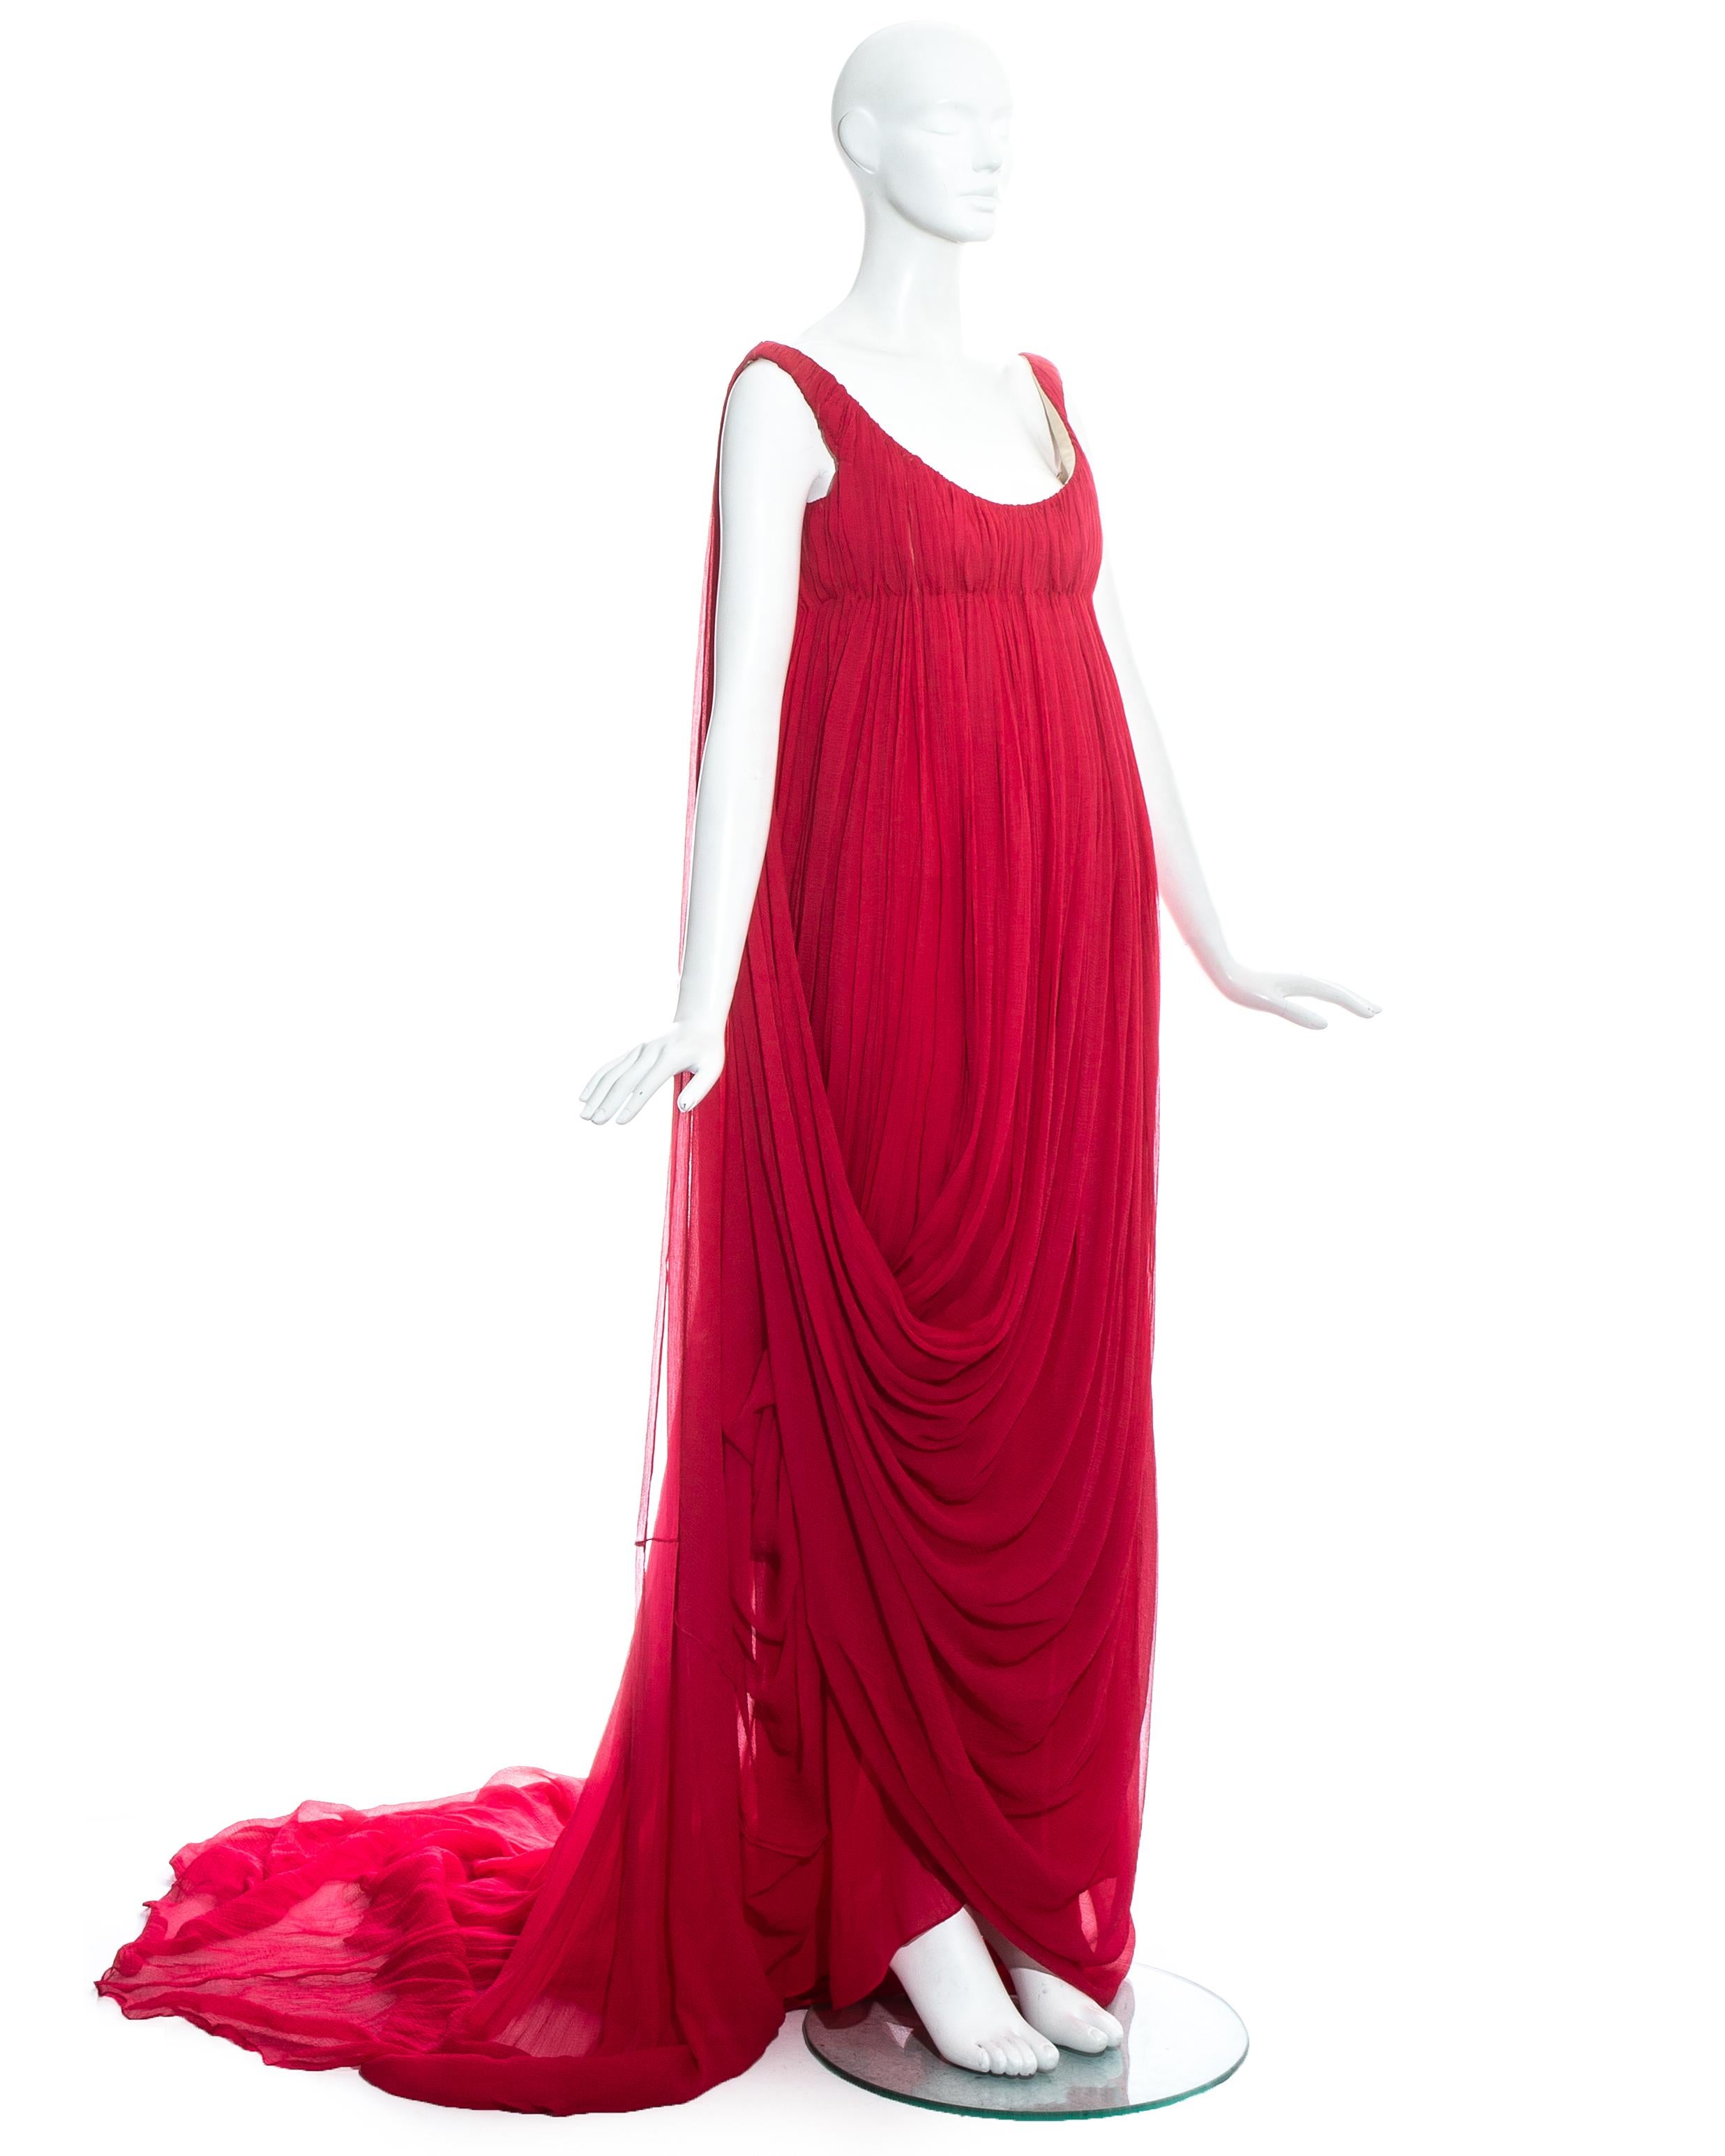 Alexander McQueen red crinkled silk chiffon empire evening dress with long train, structured bust and draped skirt.   

Fall-Winter 2008